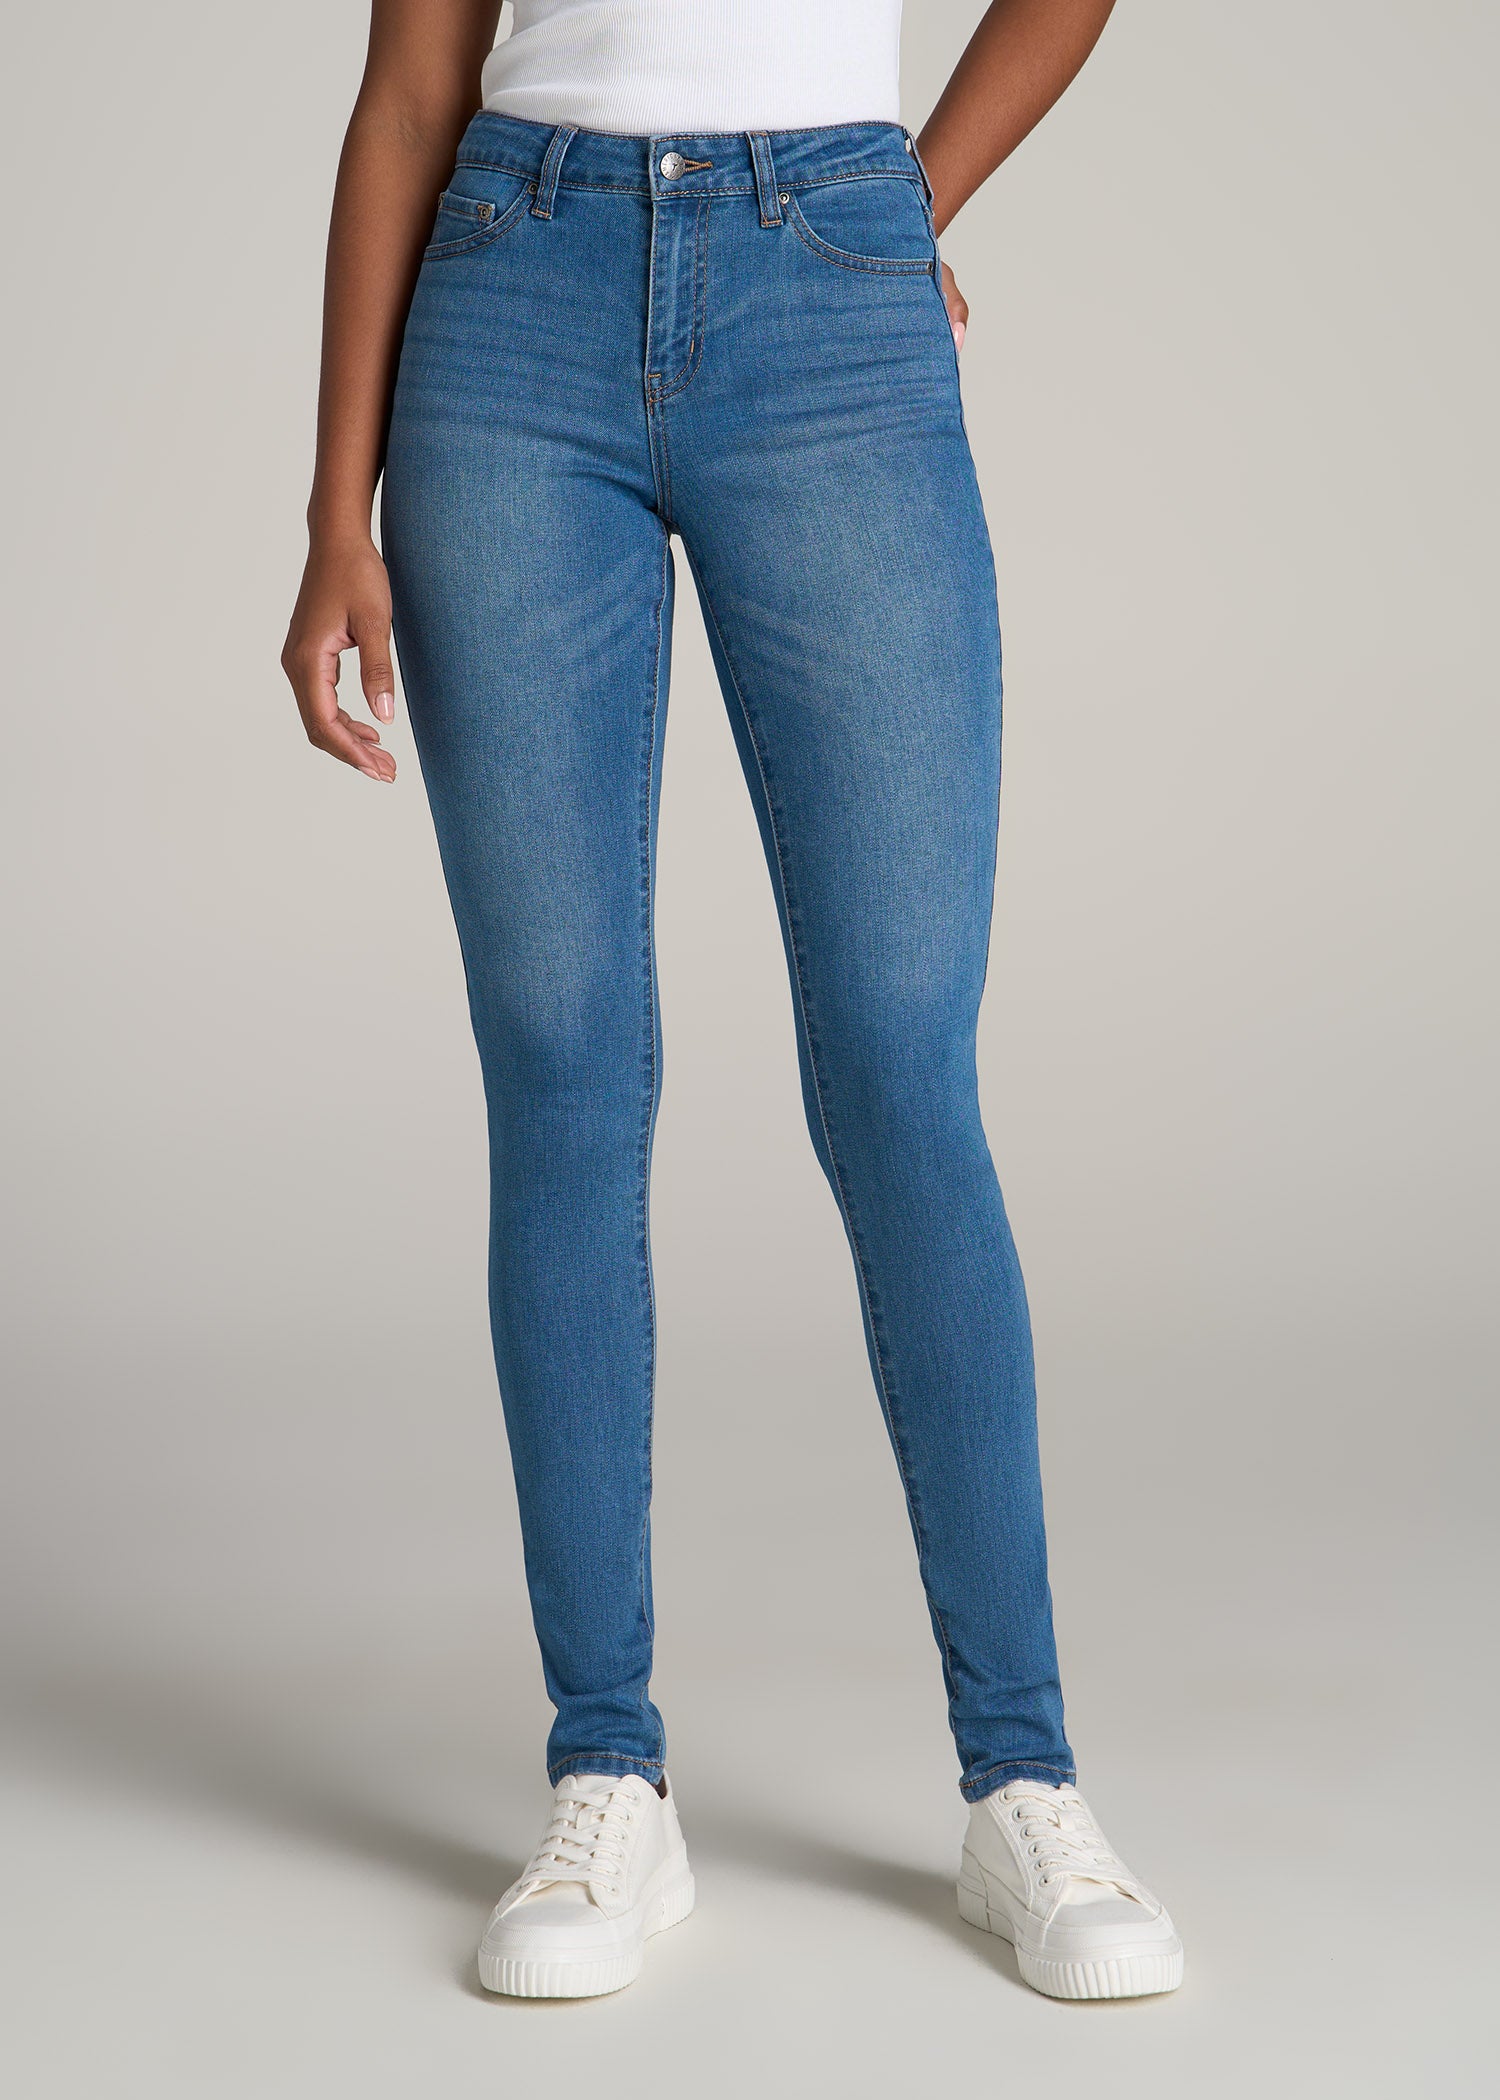 Women's Tall Mid Rise Skinny Jeans